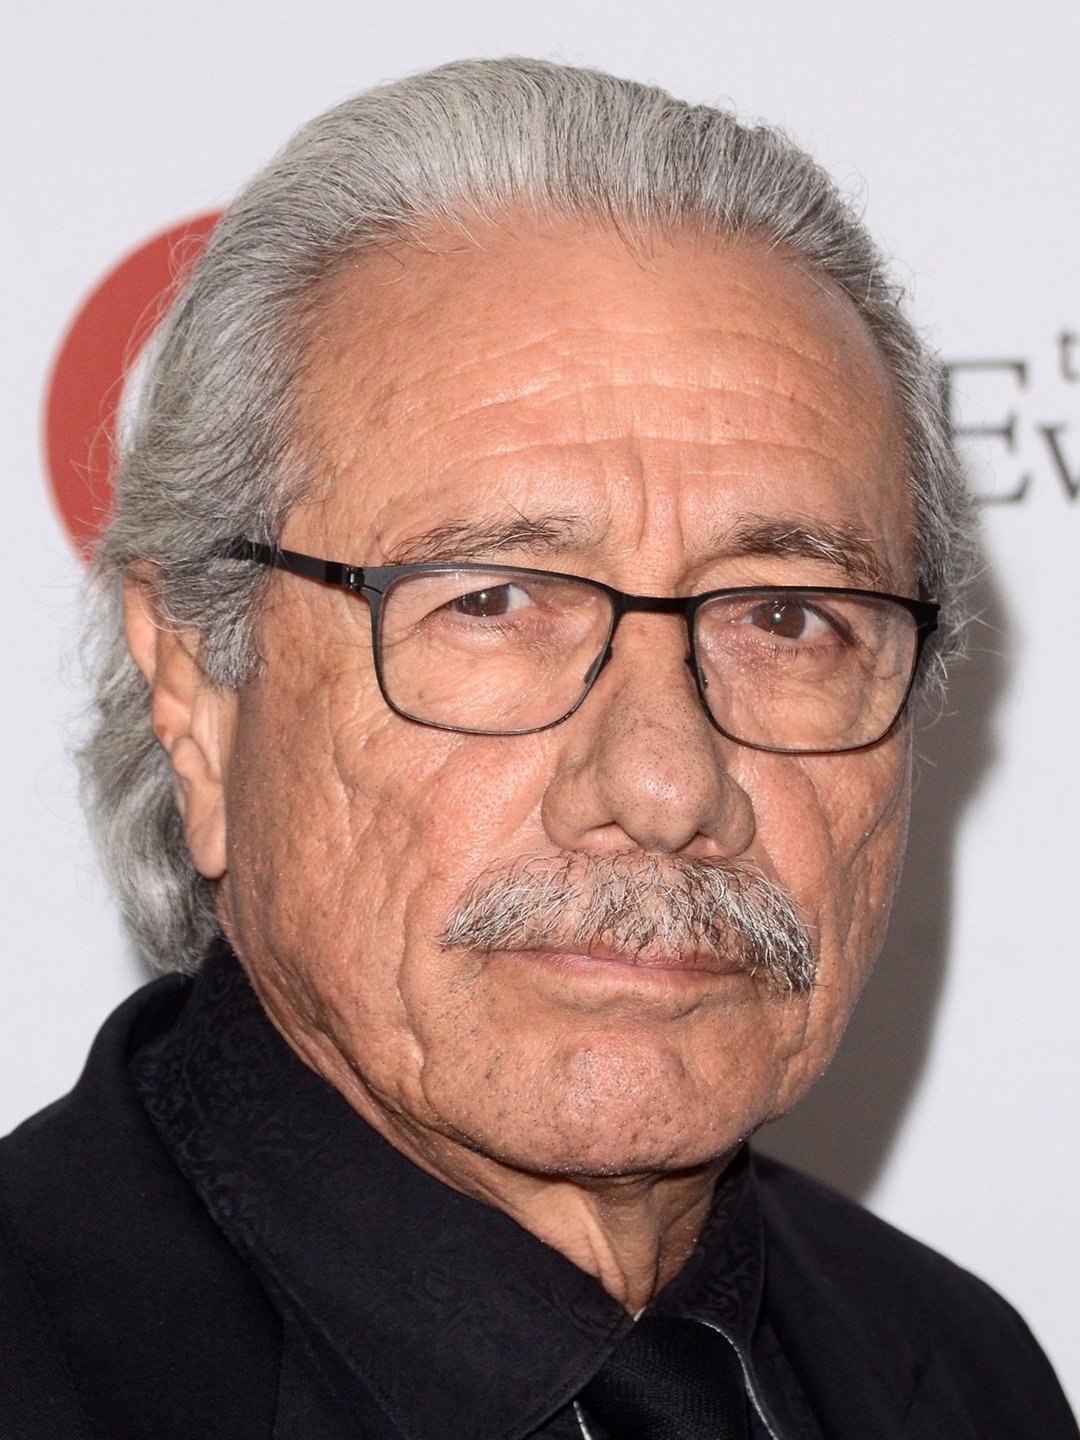 How tall is Edward James Olmos?